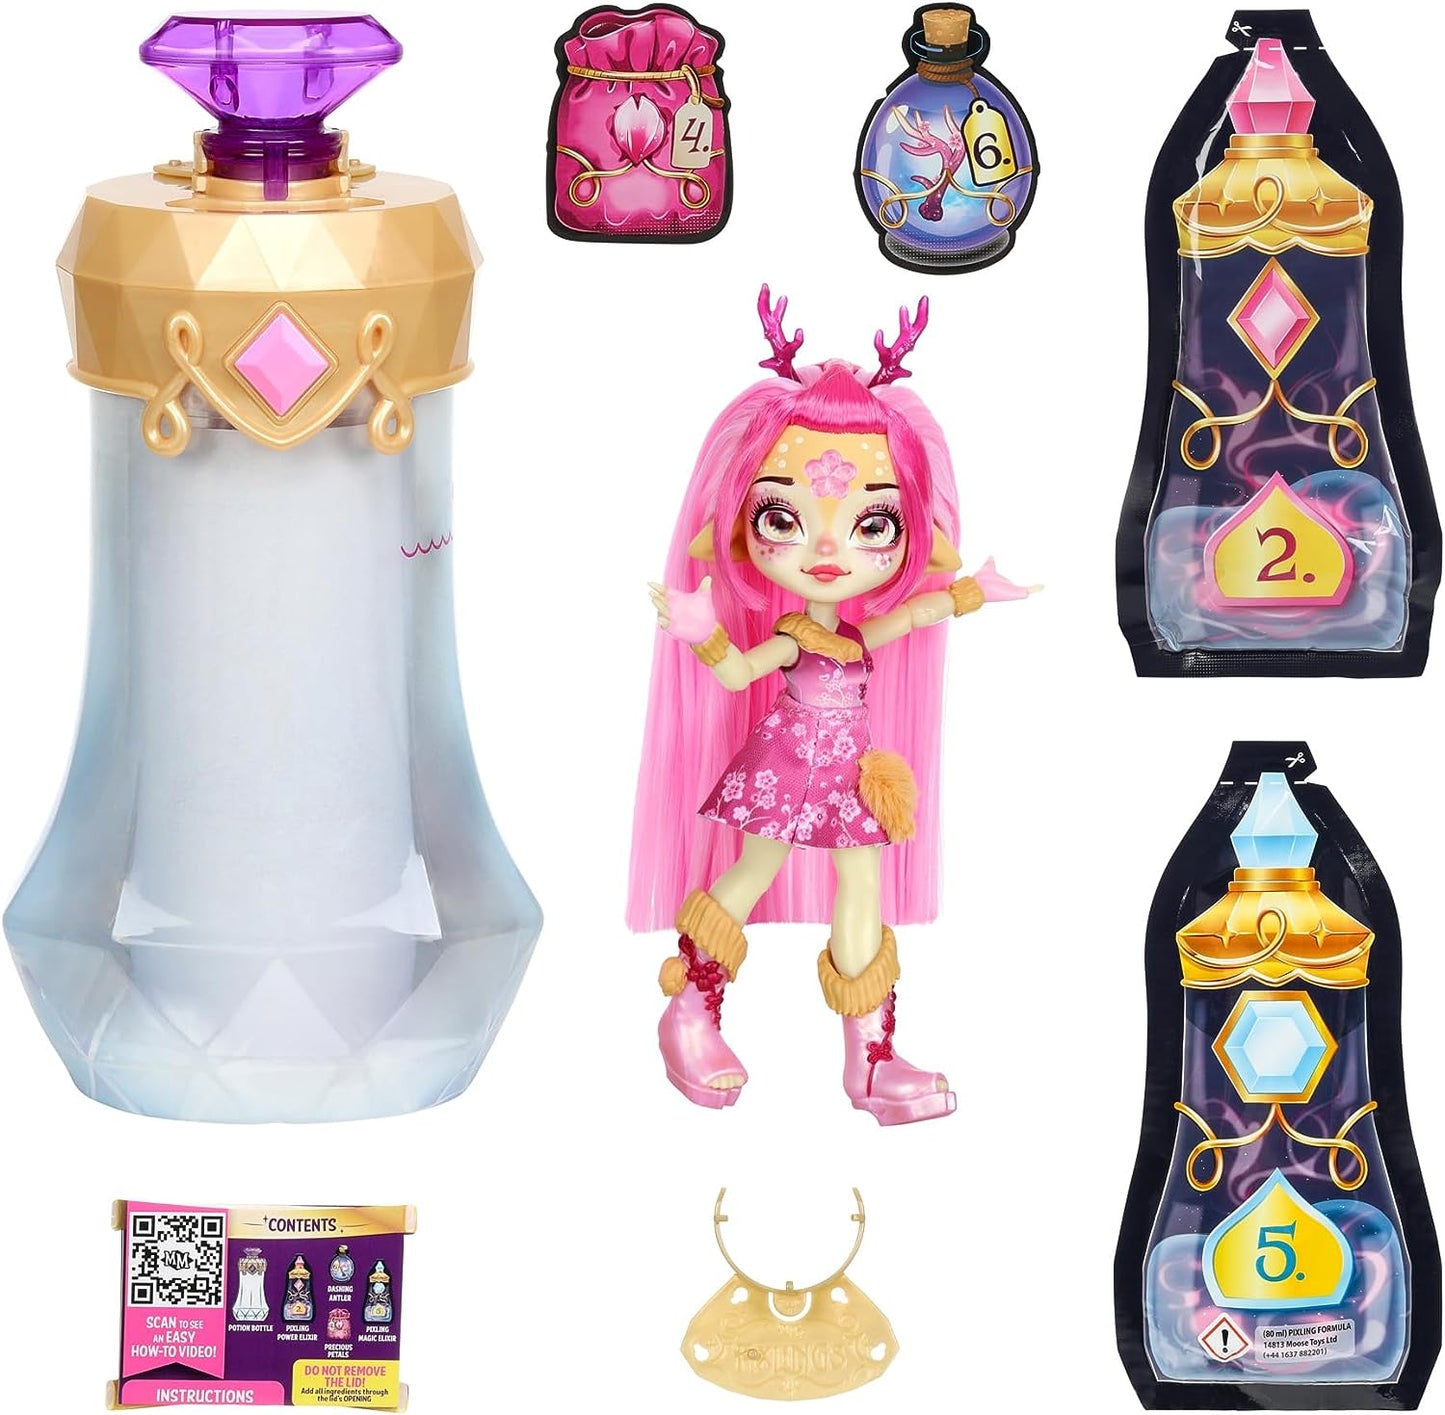 Magic Mixies Pixlings. Deerlee The Deer Pixling. Create and Mix A Magic Potion That Magically Reveals A Beautiful 6.5" Pixling Doll Inside A Potion Bottle!